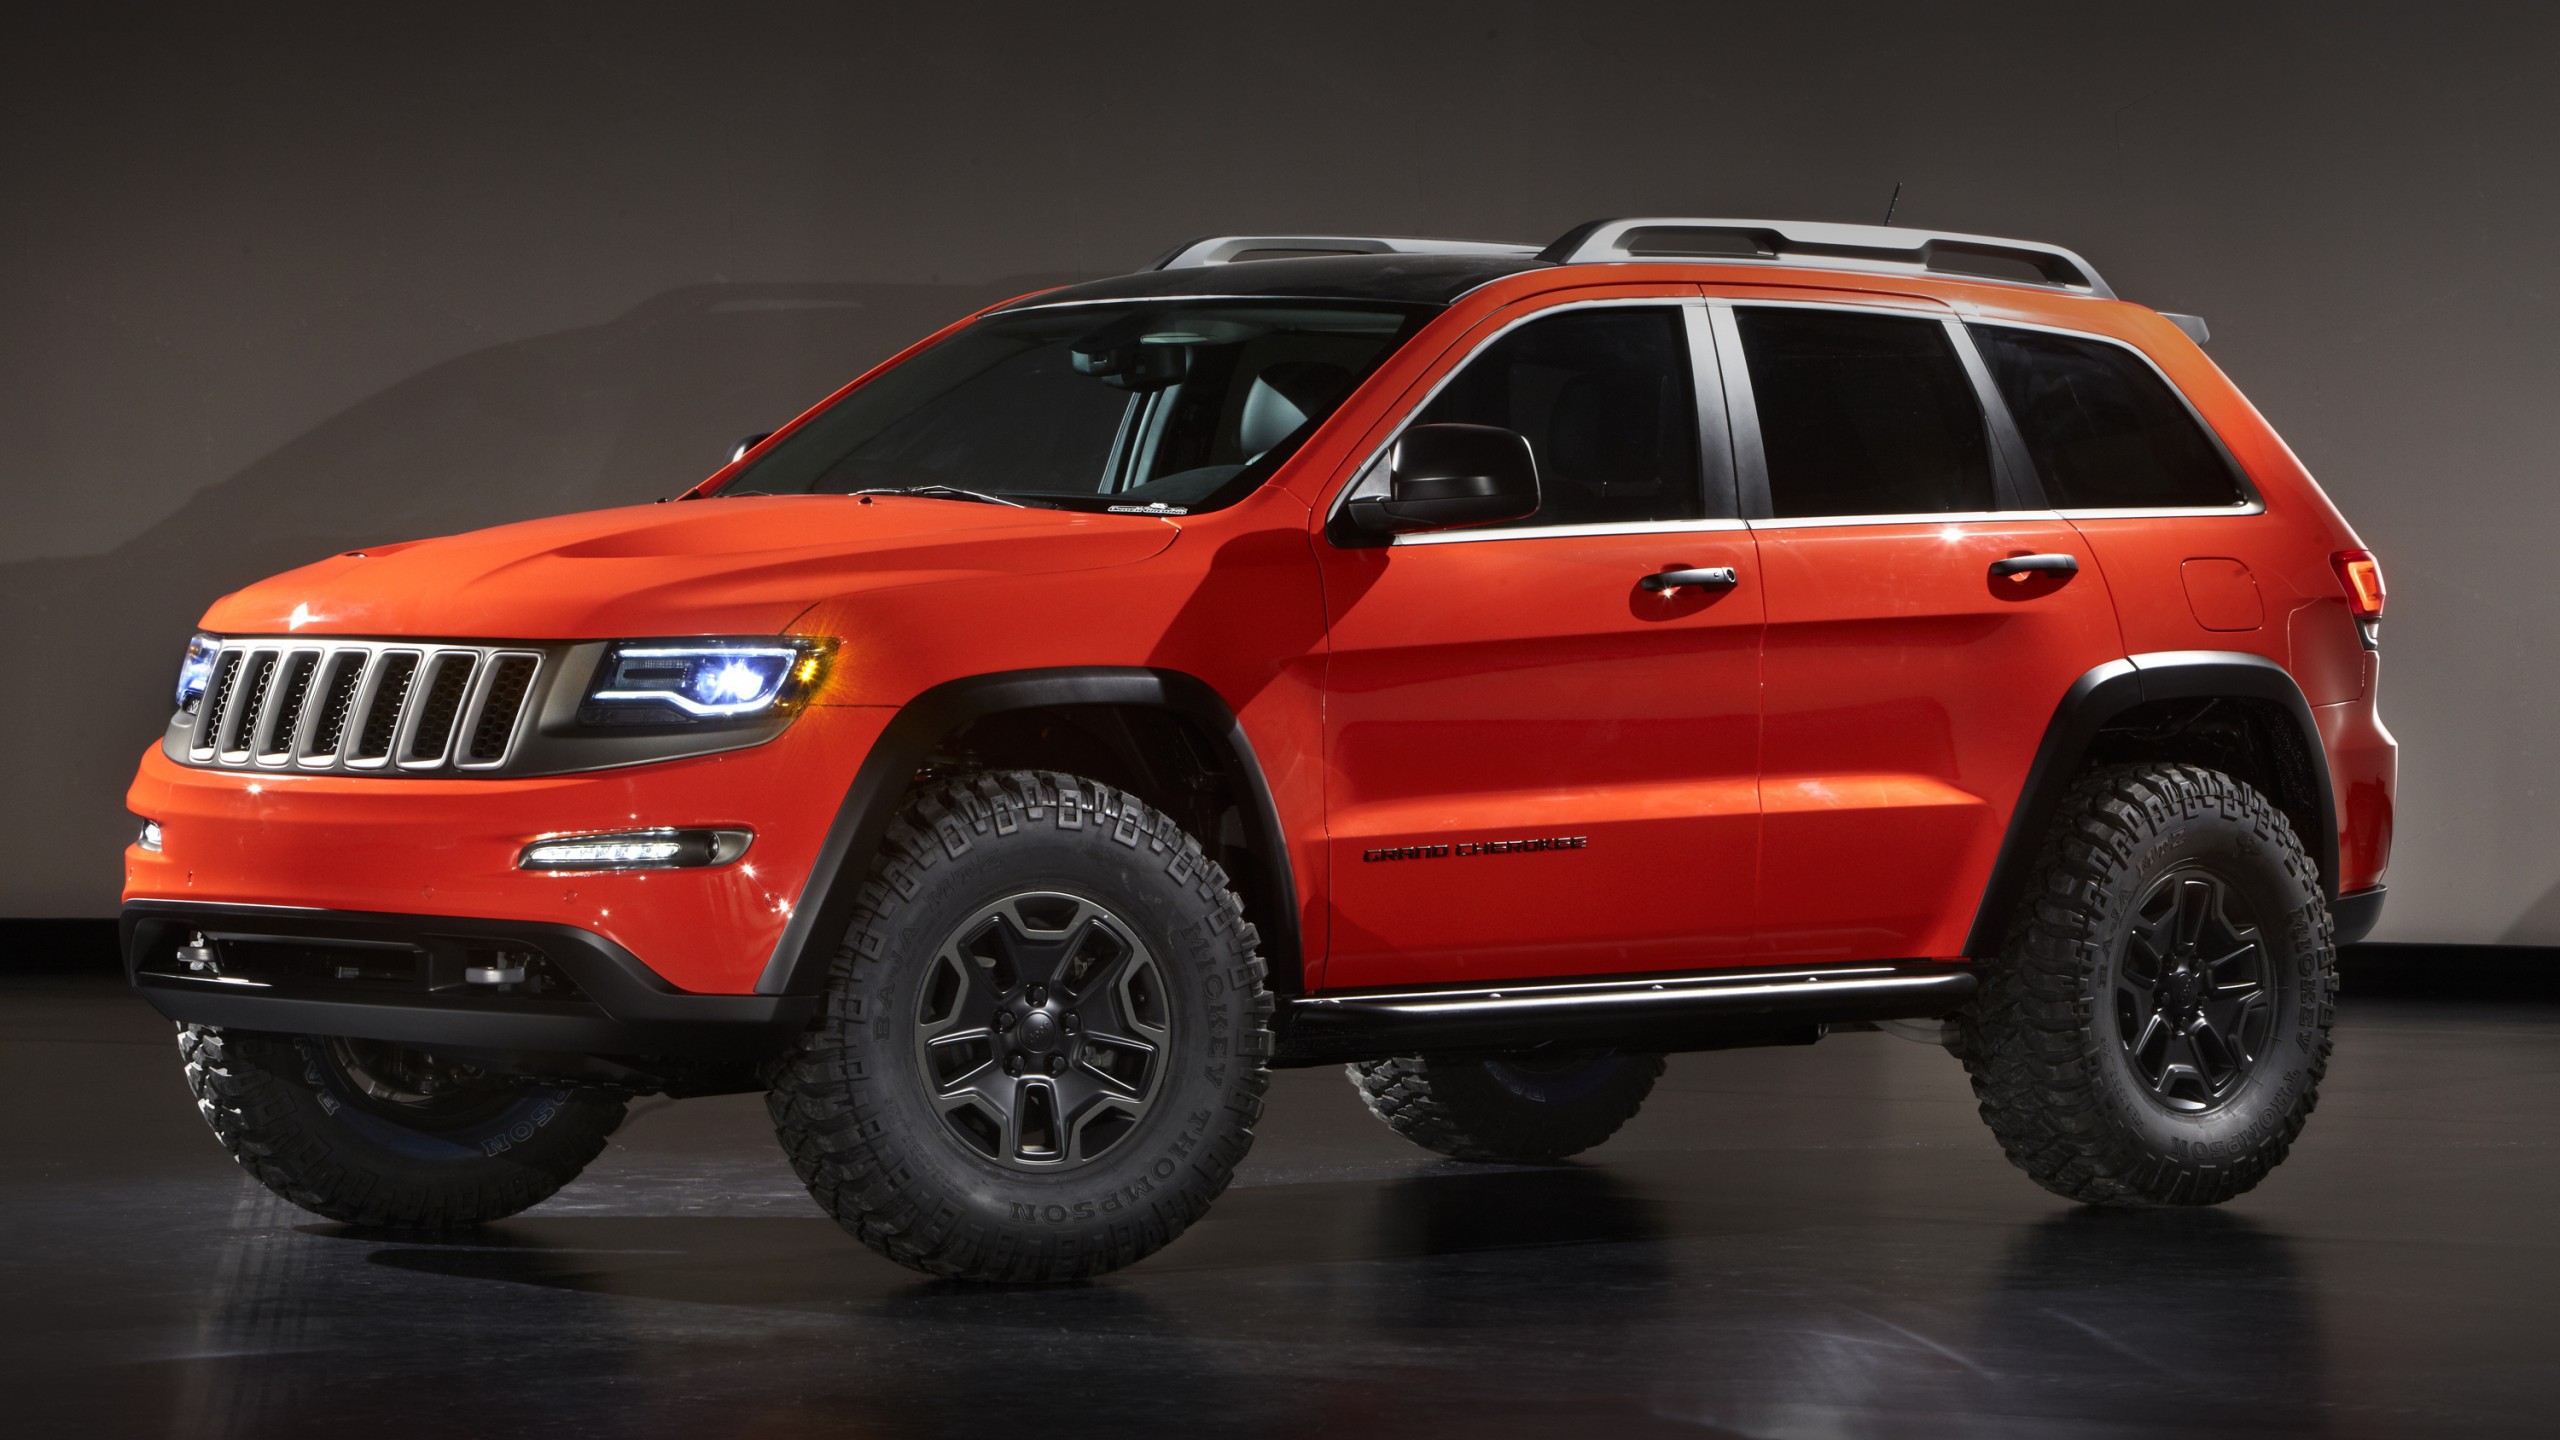 Jeep Grand Cherokee Wallpapers Images Photos Pictures Backgrounds 1998 Jeep Grand Cherokee 4.0 Towing Capacity